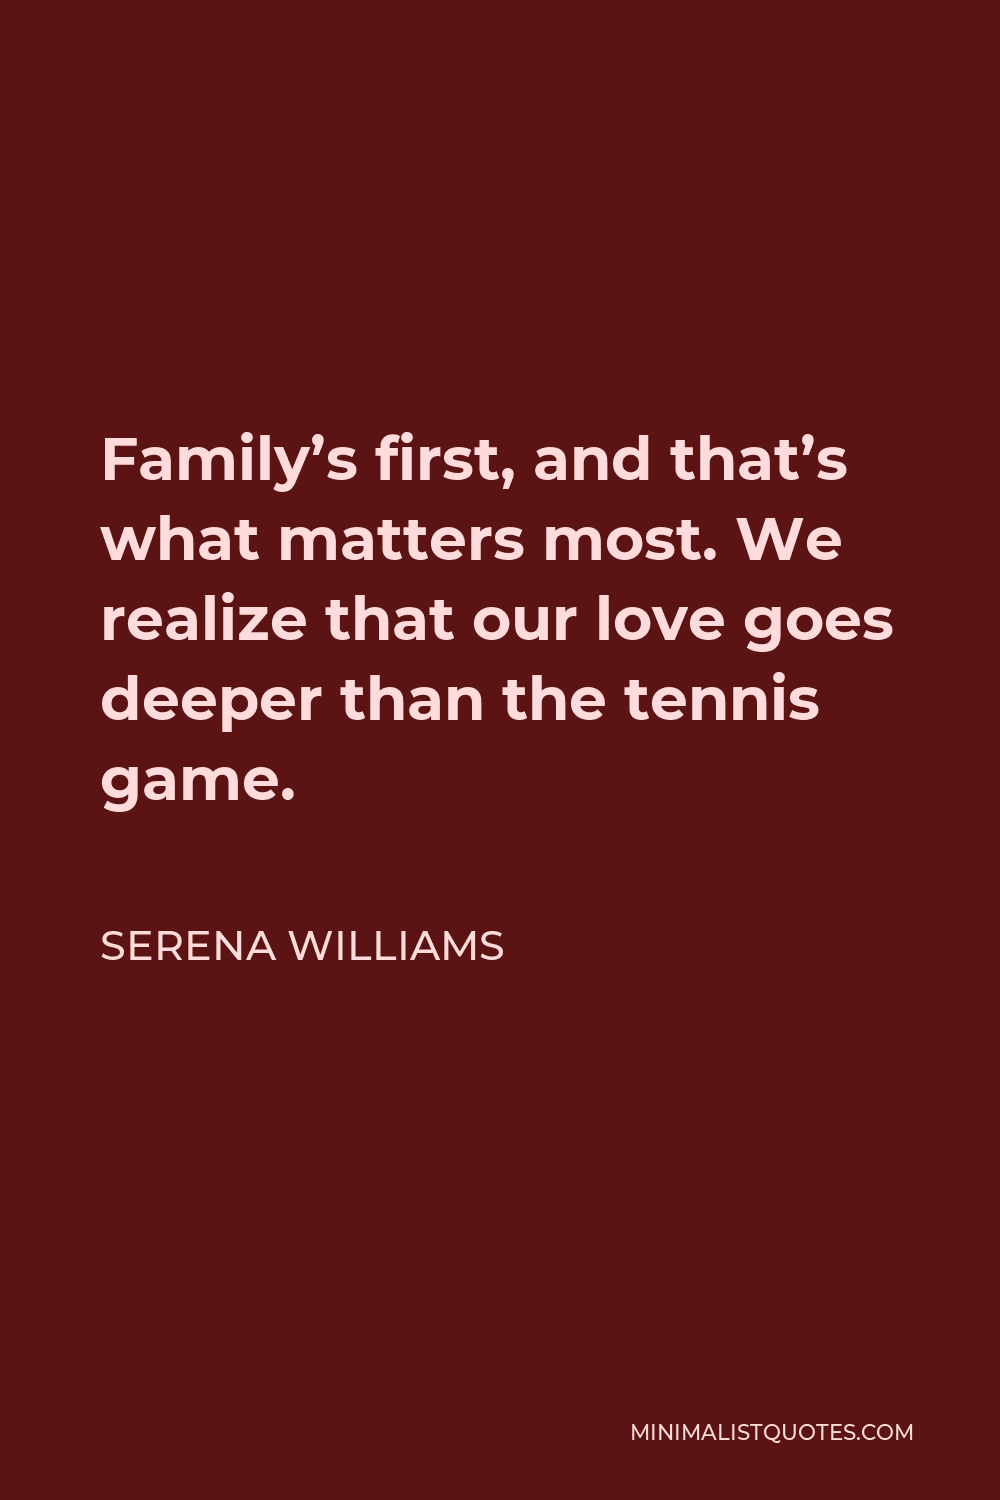 Serena Williams Quote - Family’s first, and that’s what matters most. We realize that our love goes deeper than the tennis game.